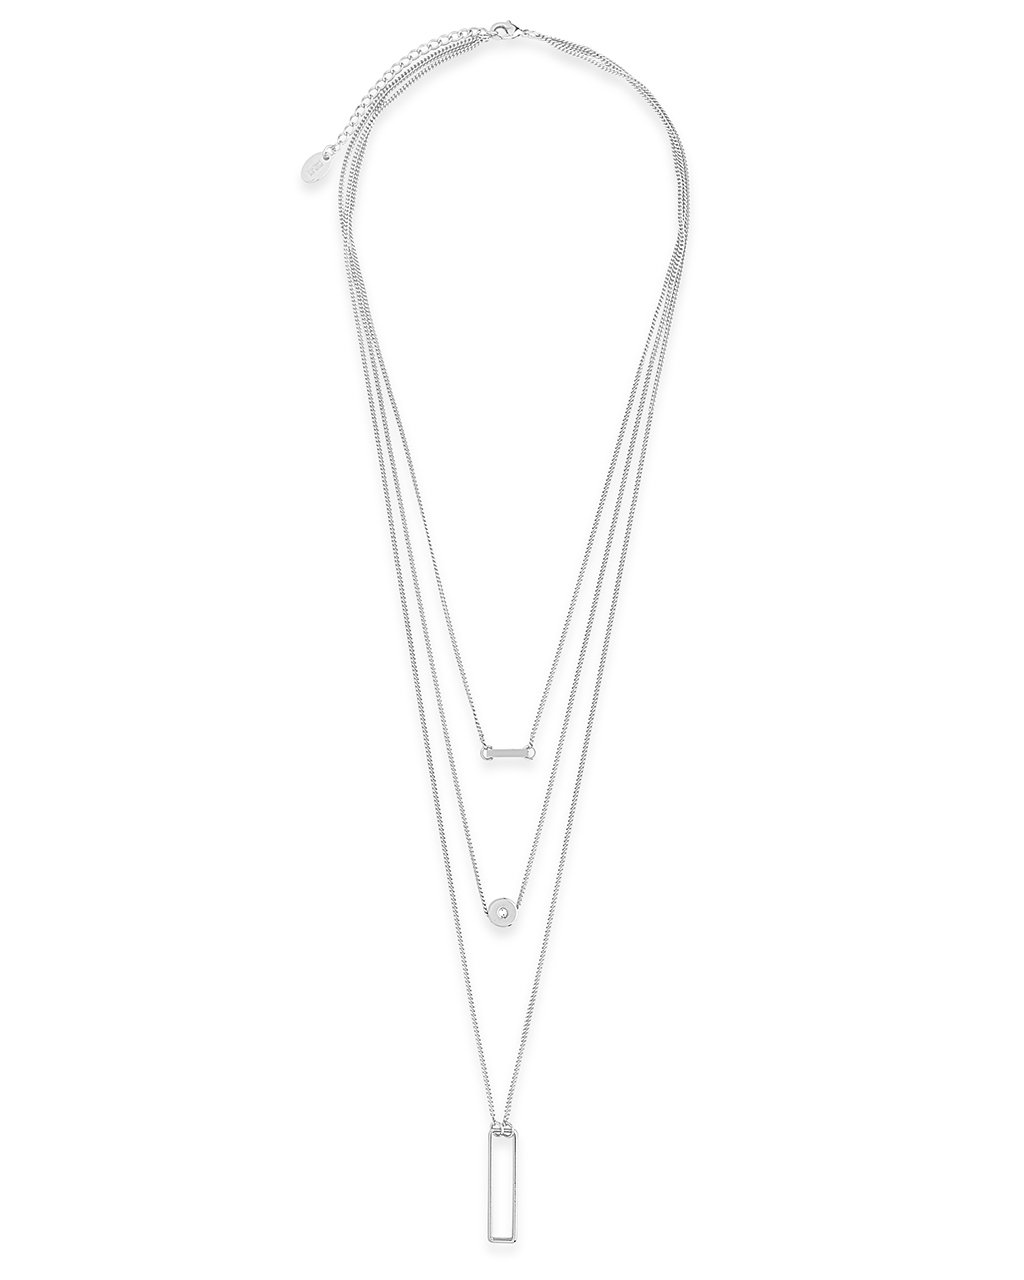 Bar, CZ Disk, Open Bar Layered Necklace - Sterling Forever